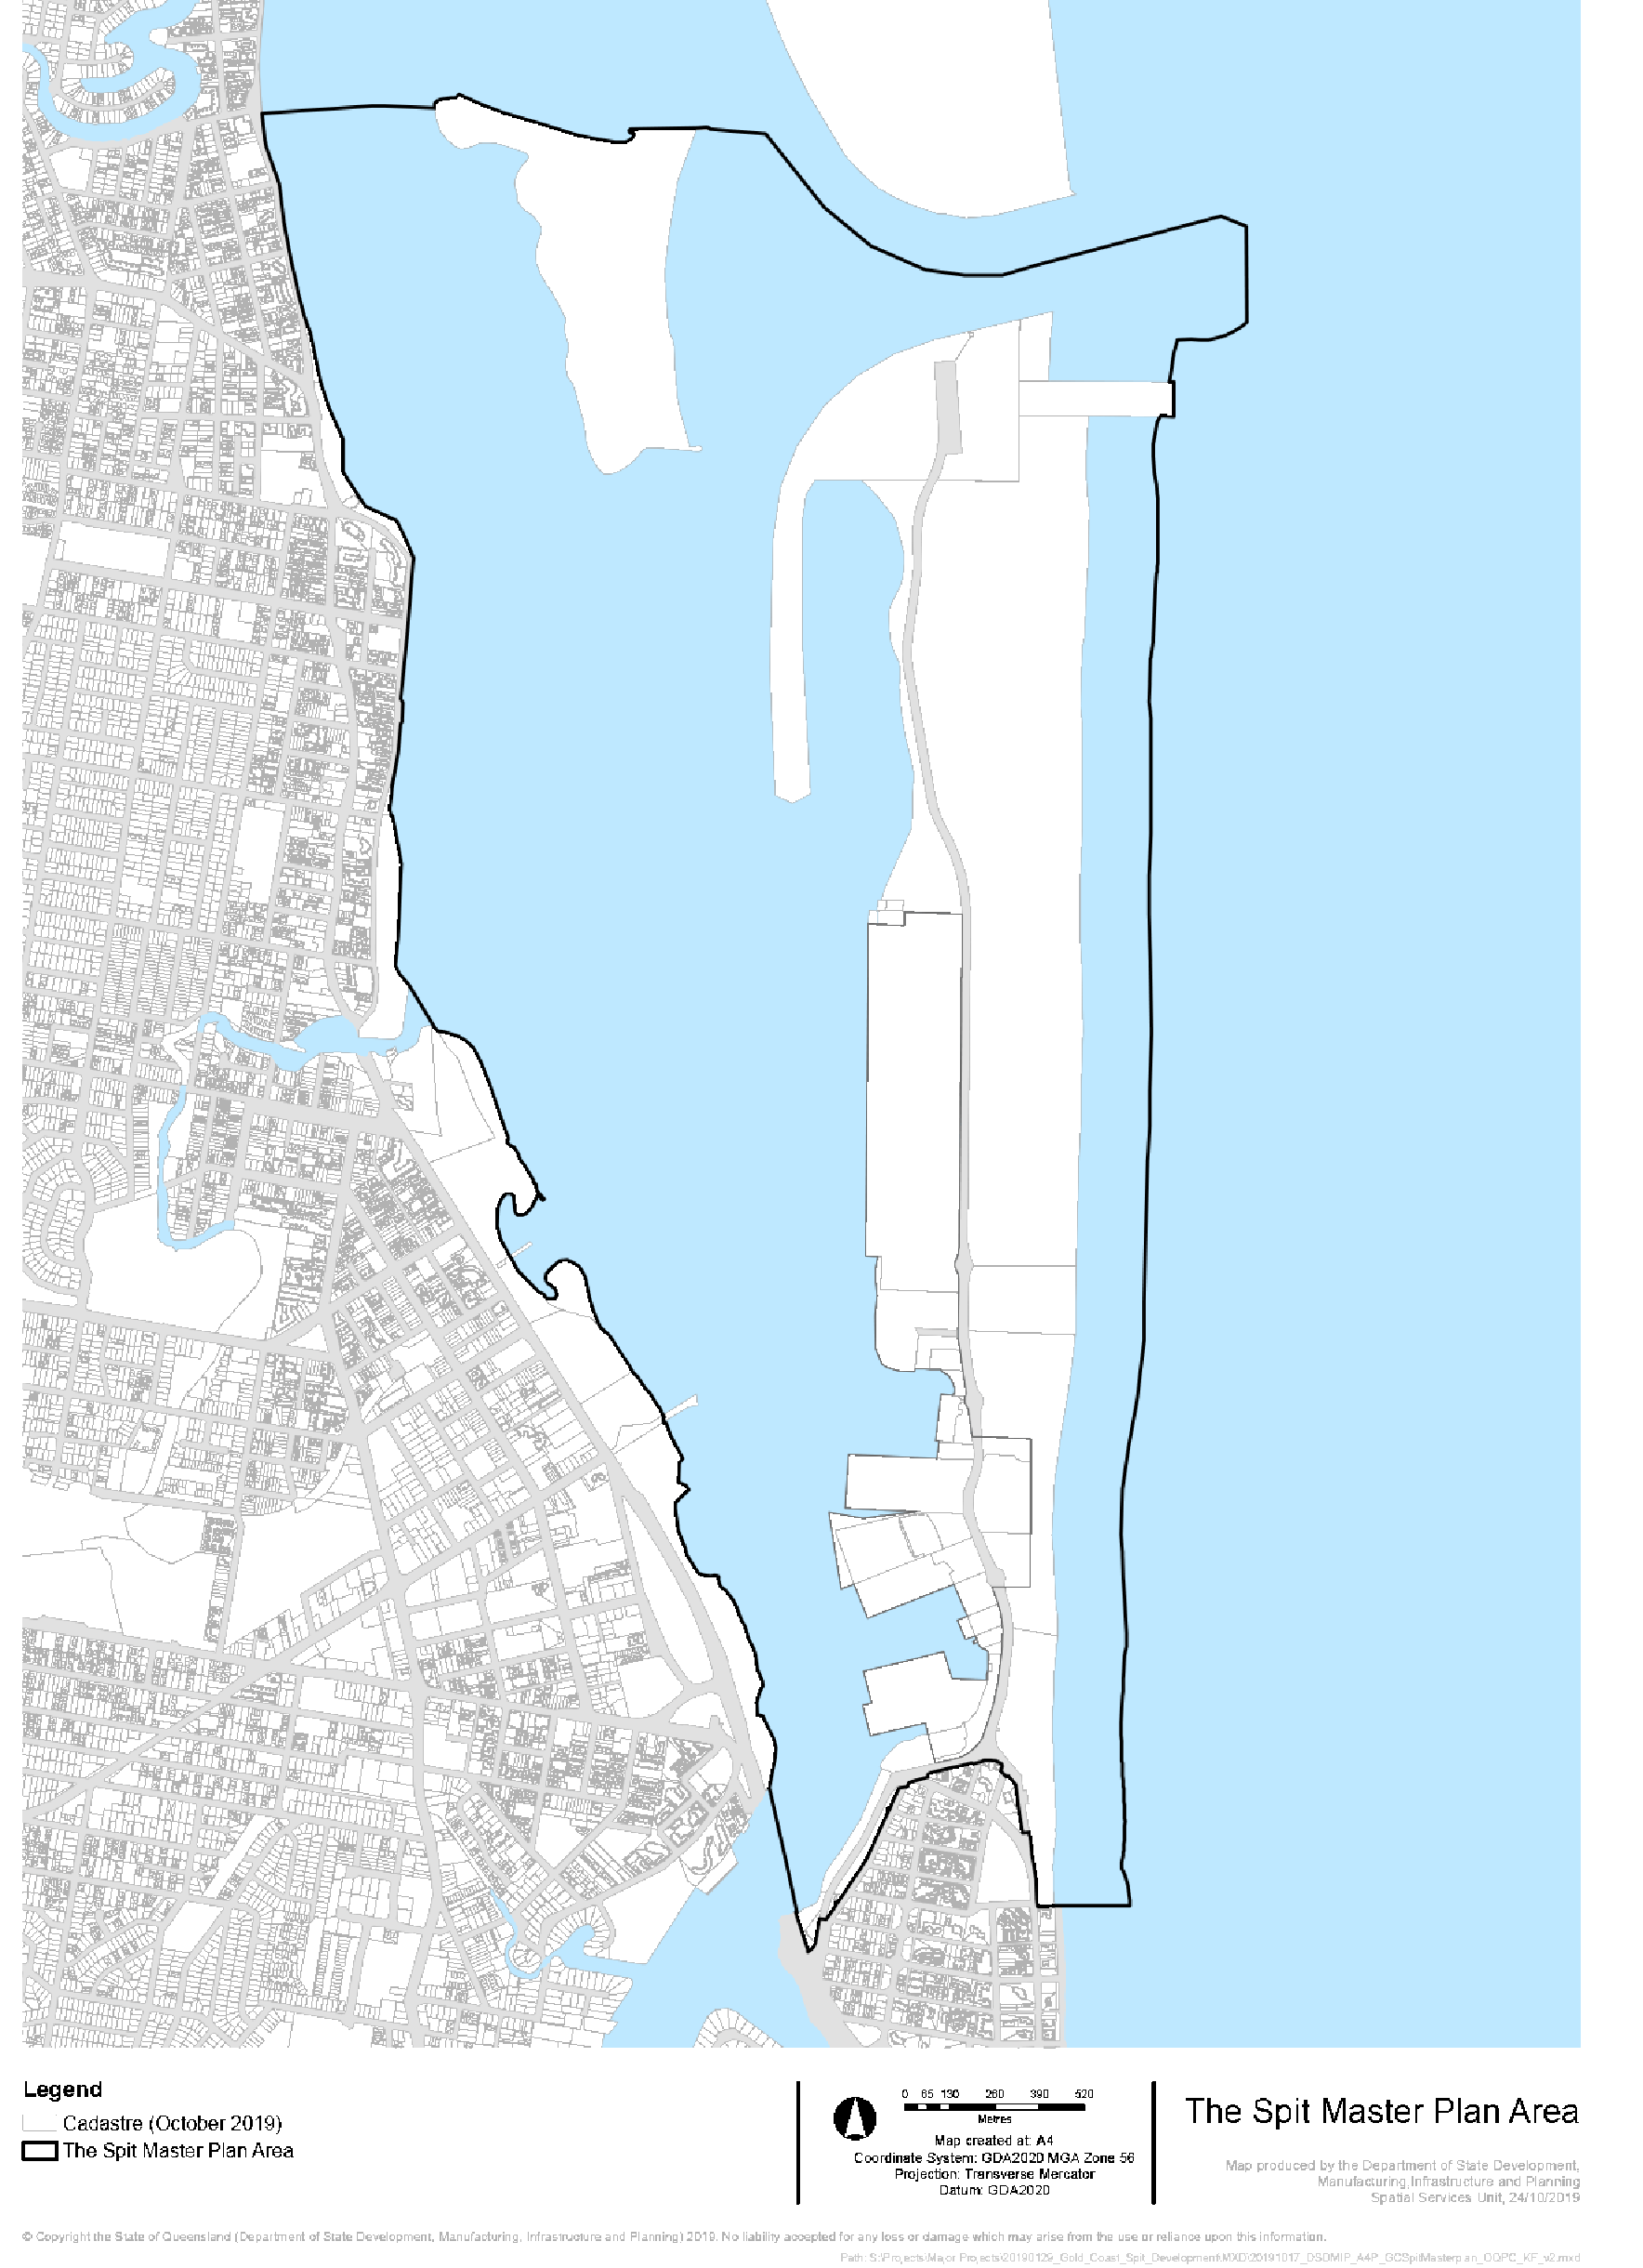 map of the Spit master plan area